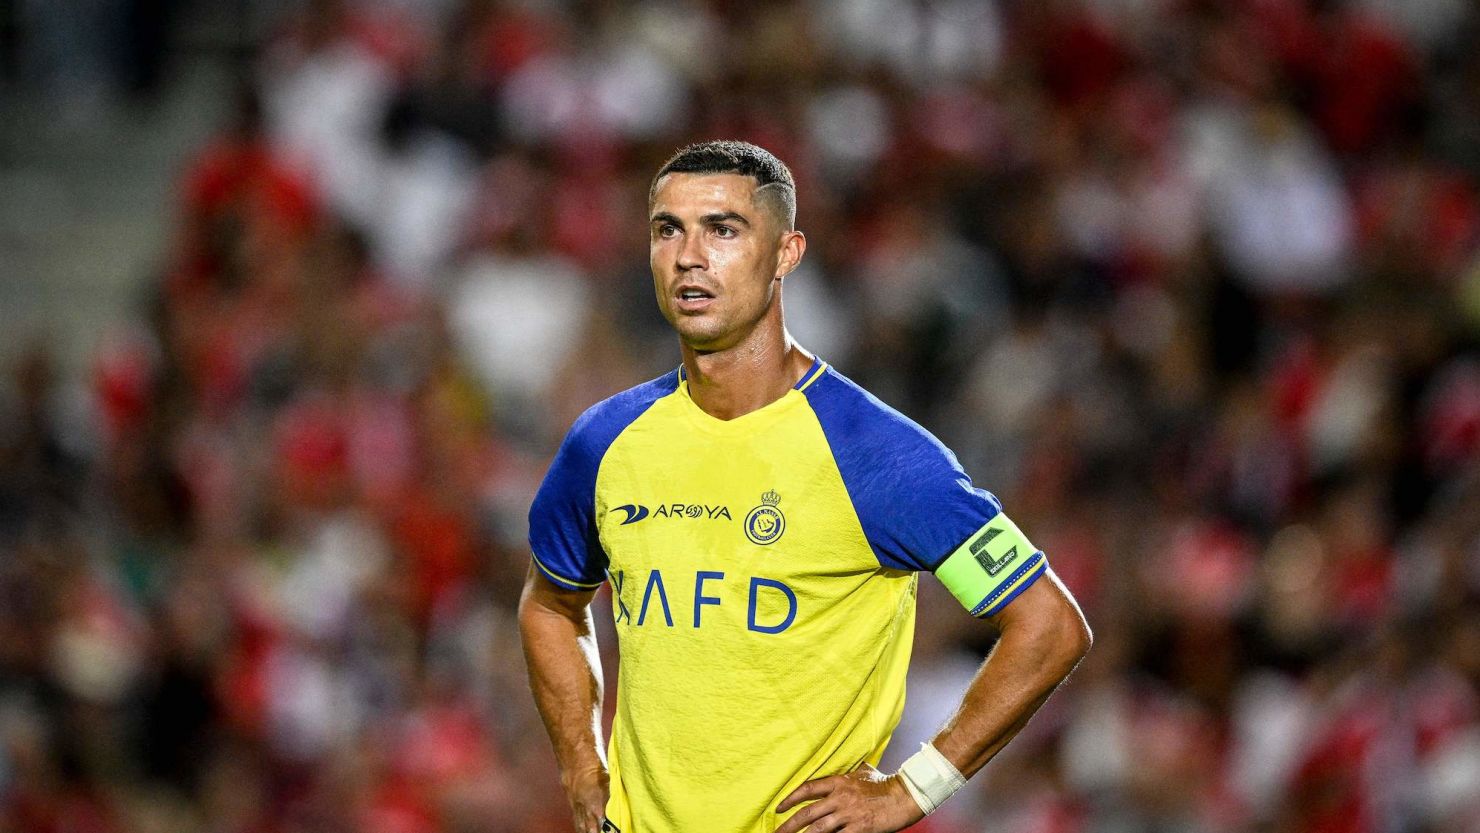 Al Nassr's Portuguese forward Cristiano Ronaldo looks on during the Algarve Cup football match between Al Nassr and SL Benfica at Algarve stadium in Loule on July 20, 2023. (Photo by Patricia DE MELO MOREIRA / AFP) (Photo by PATRICIA DE MELO MOREIRA/AFP via Getty Images)